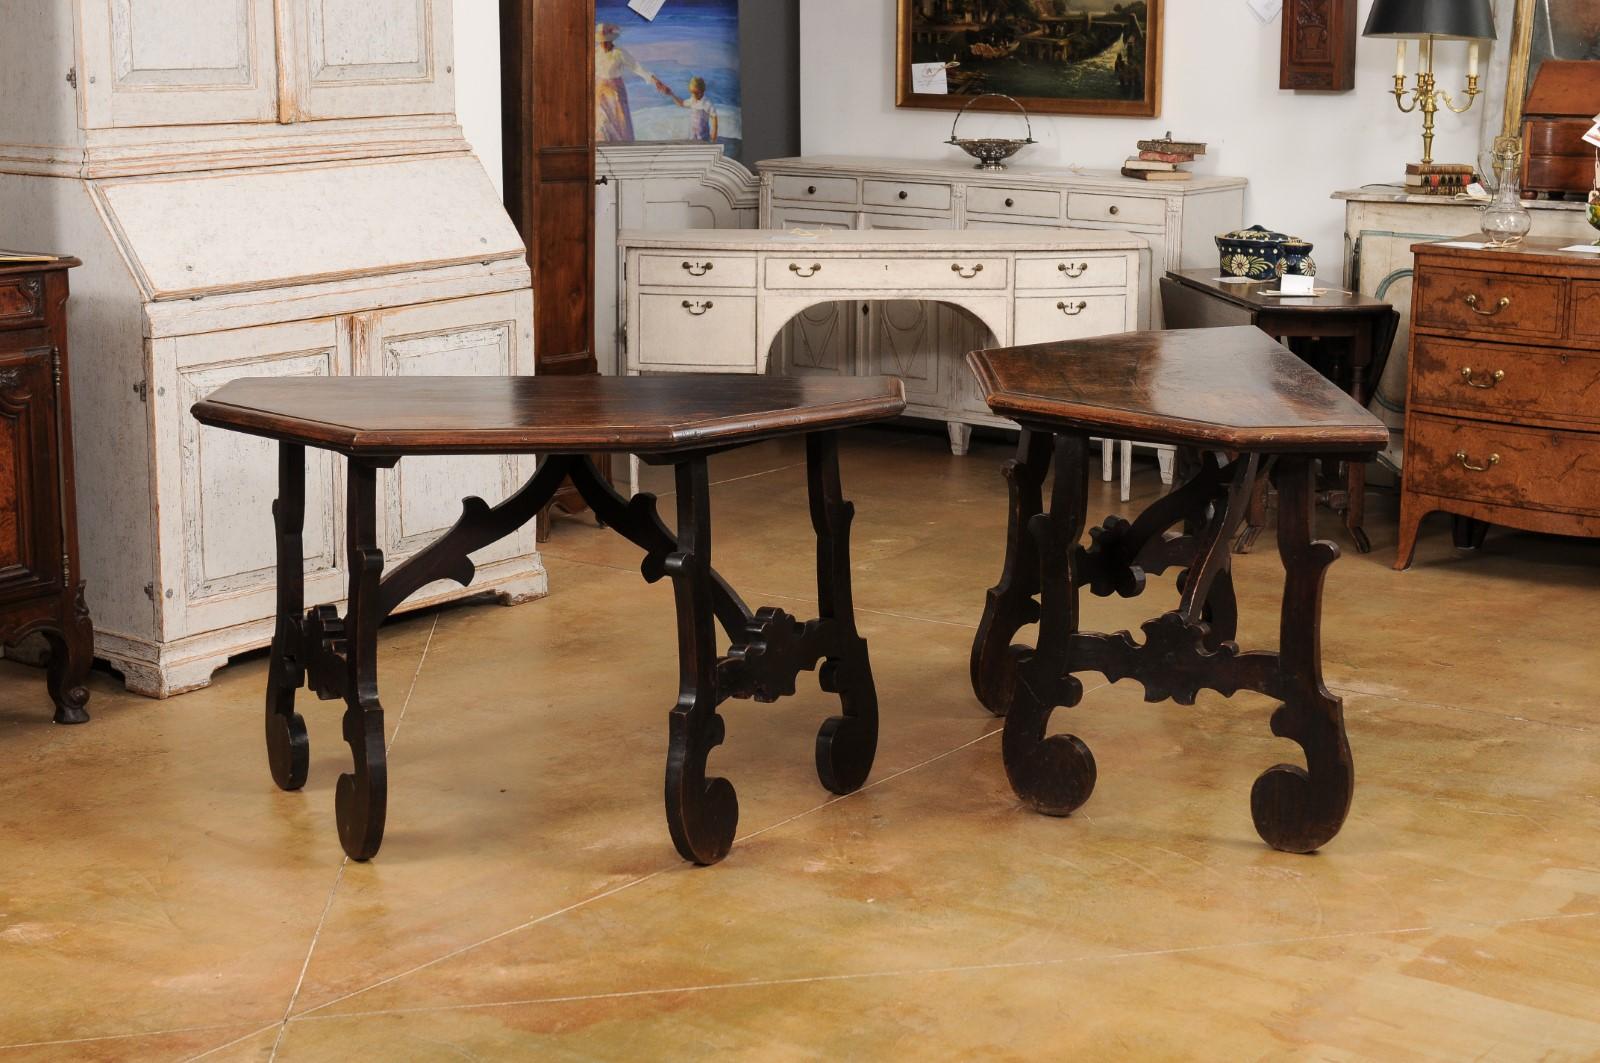 17th Century Italian Baroque Walnut Fratino Consoles with Carved Bases, a Pair For Sale 7